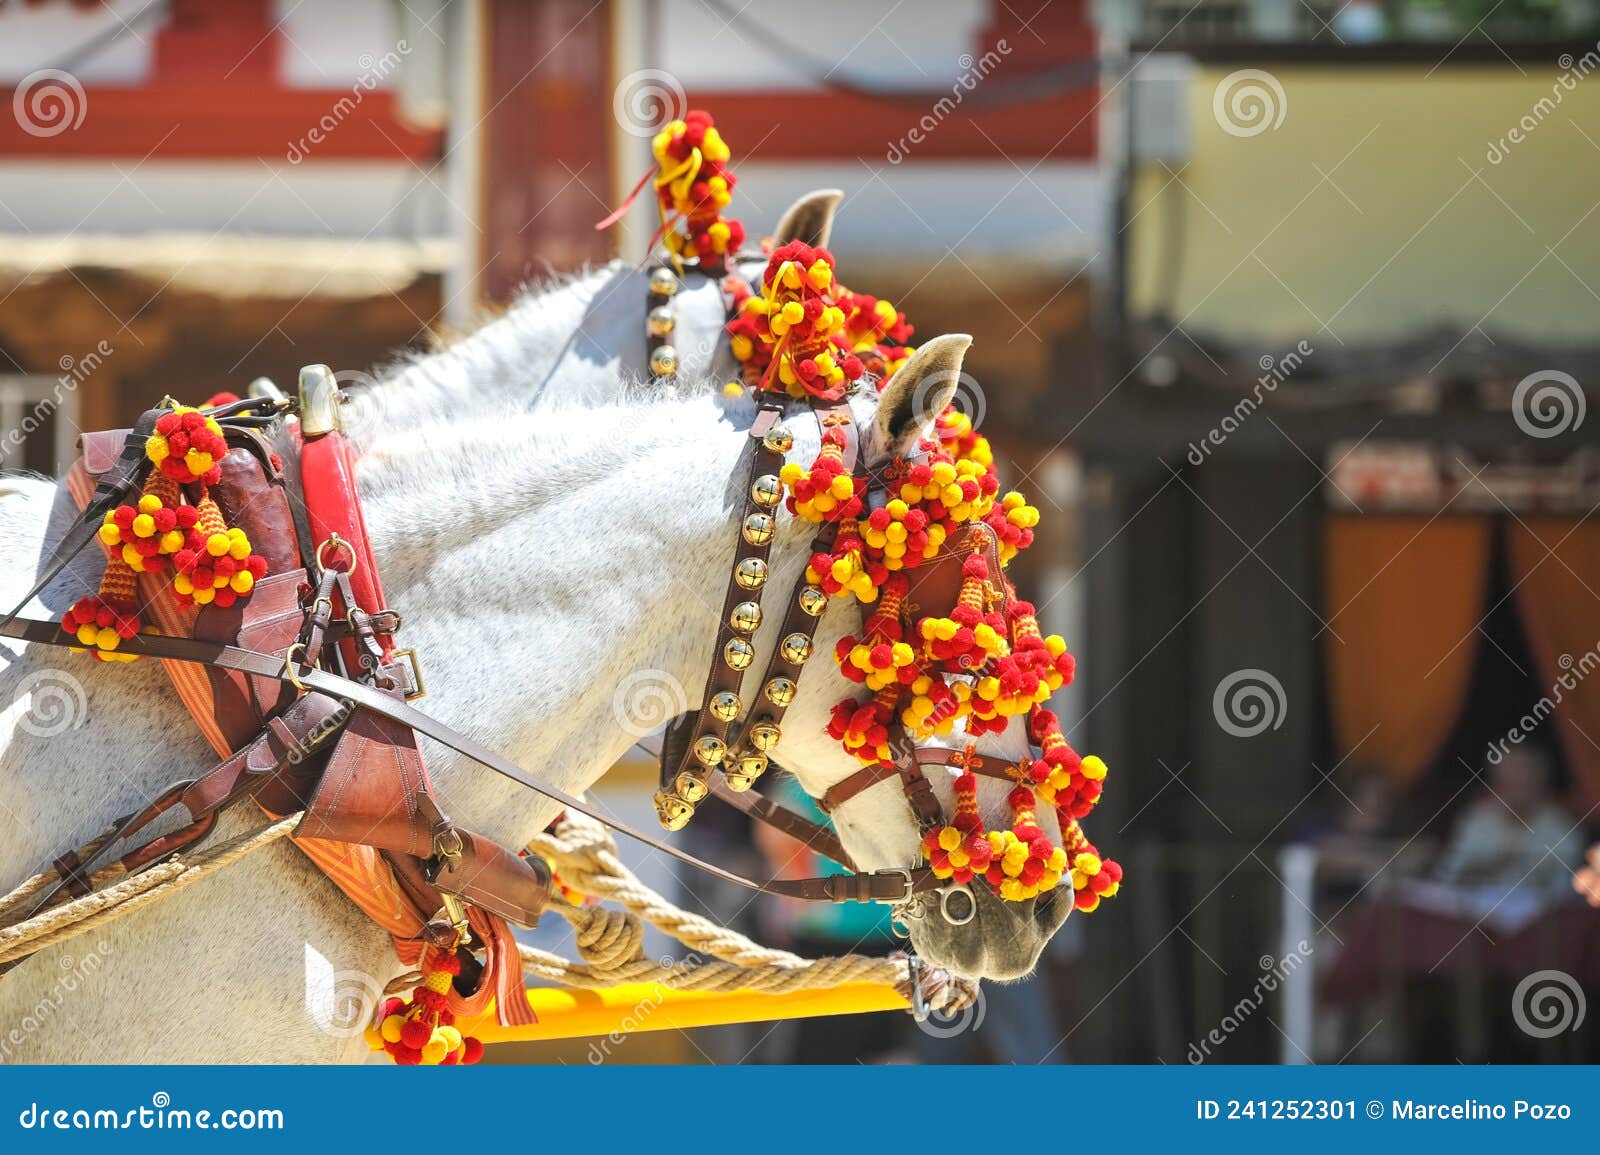 ornaments on the head of carriage horses